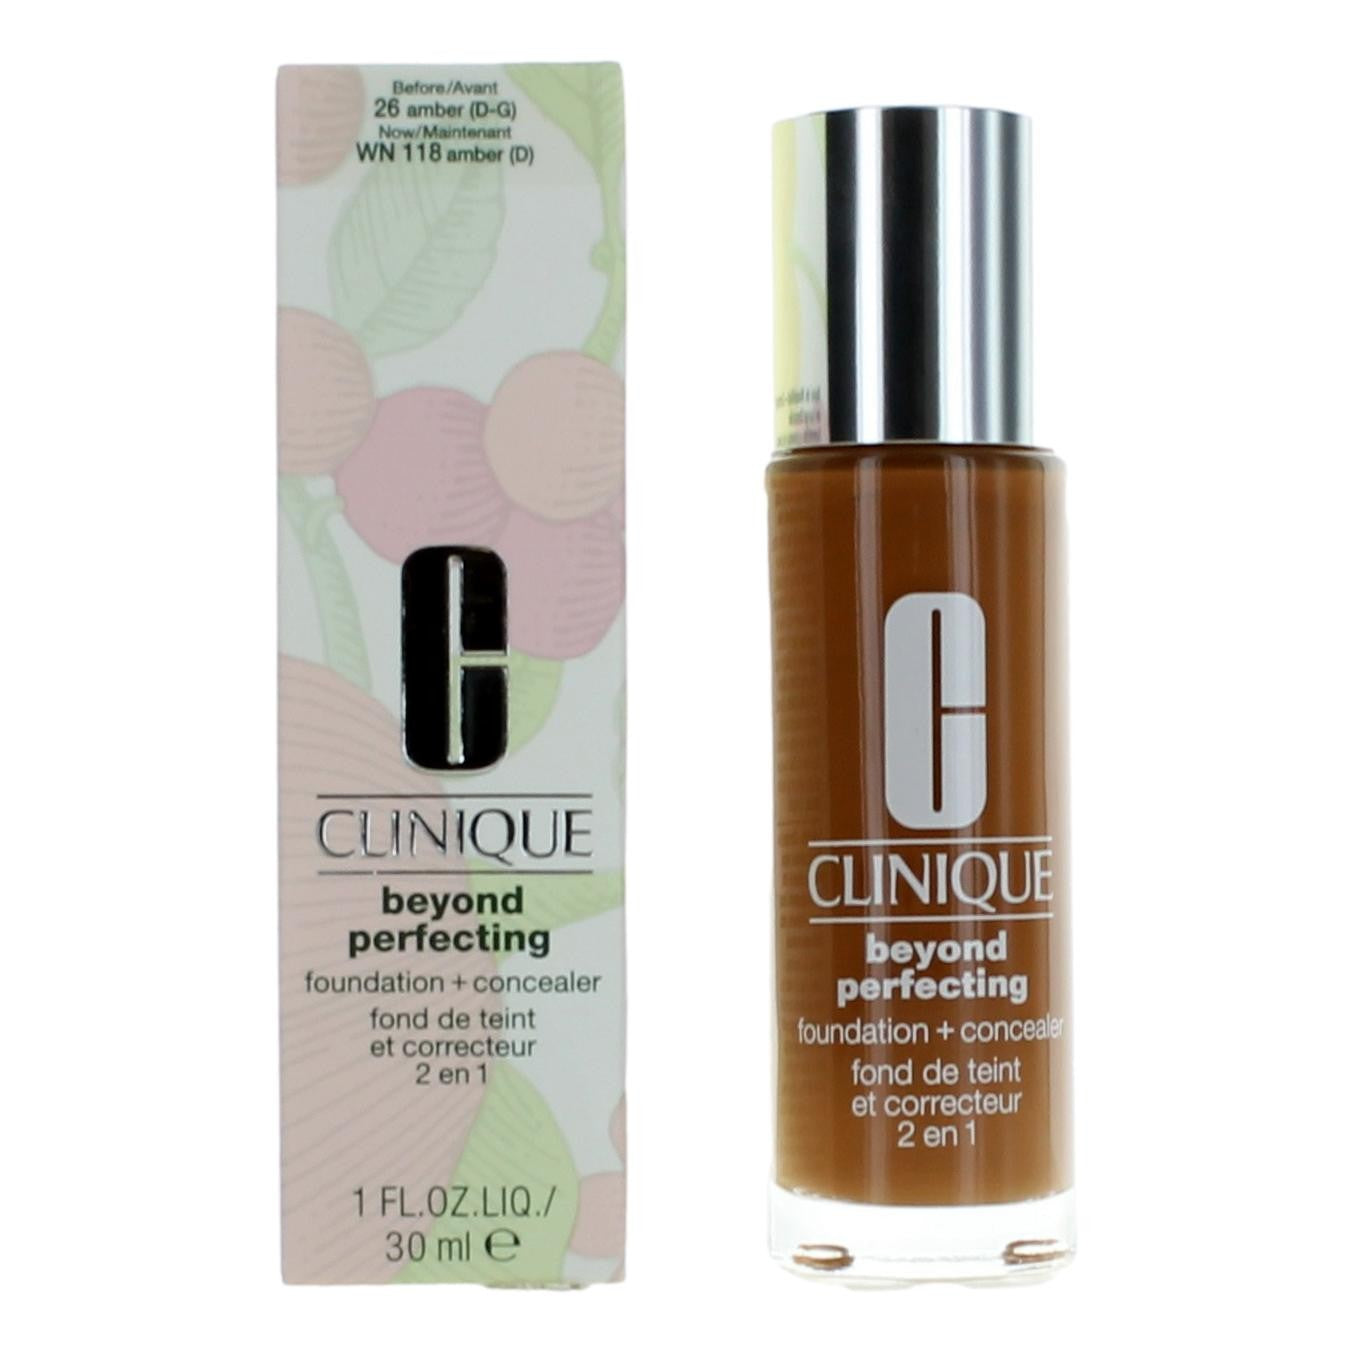 Clinique Beyond Perfecting, 1oz Foundation + Concealer - WN 118 Amber - WN 118 Amber